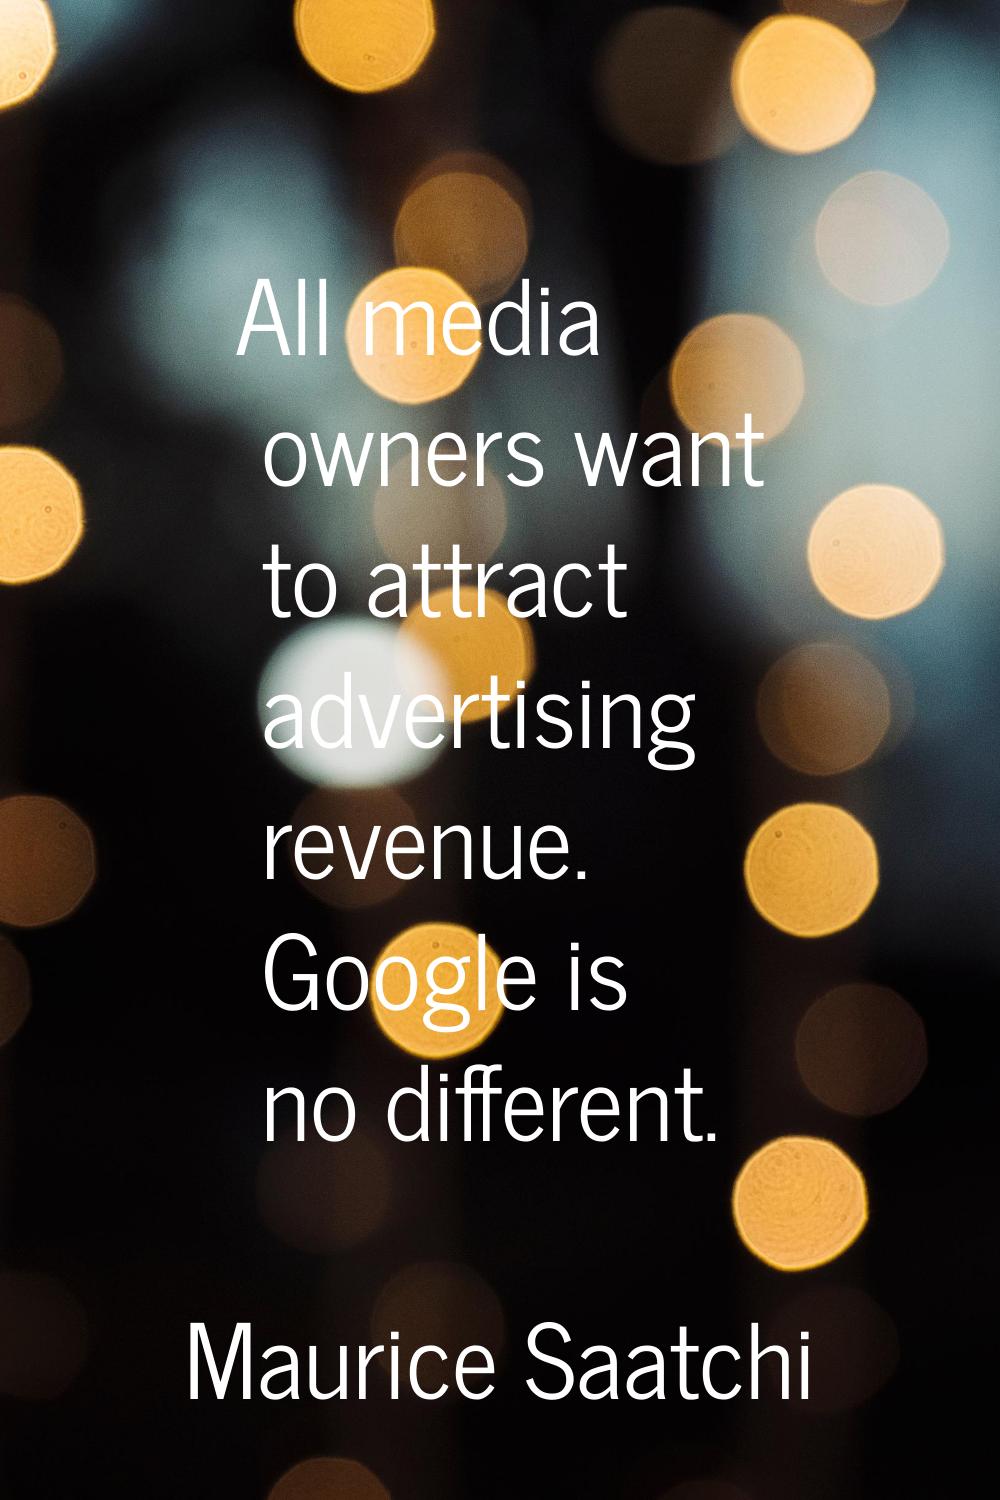 All media owners want to attract advertising revenue. Google is no different.